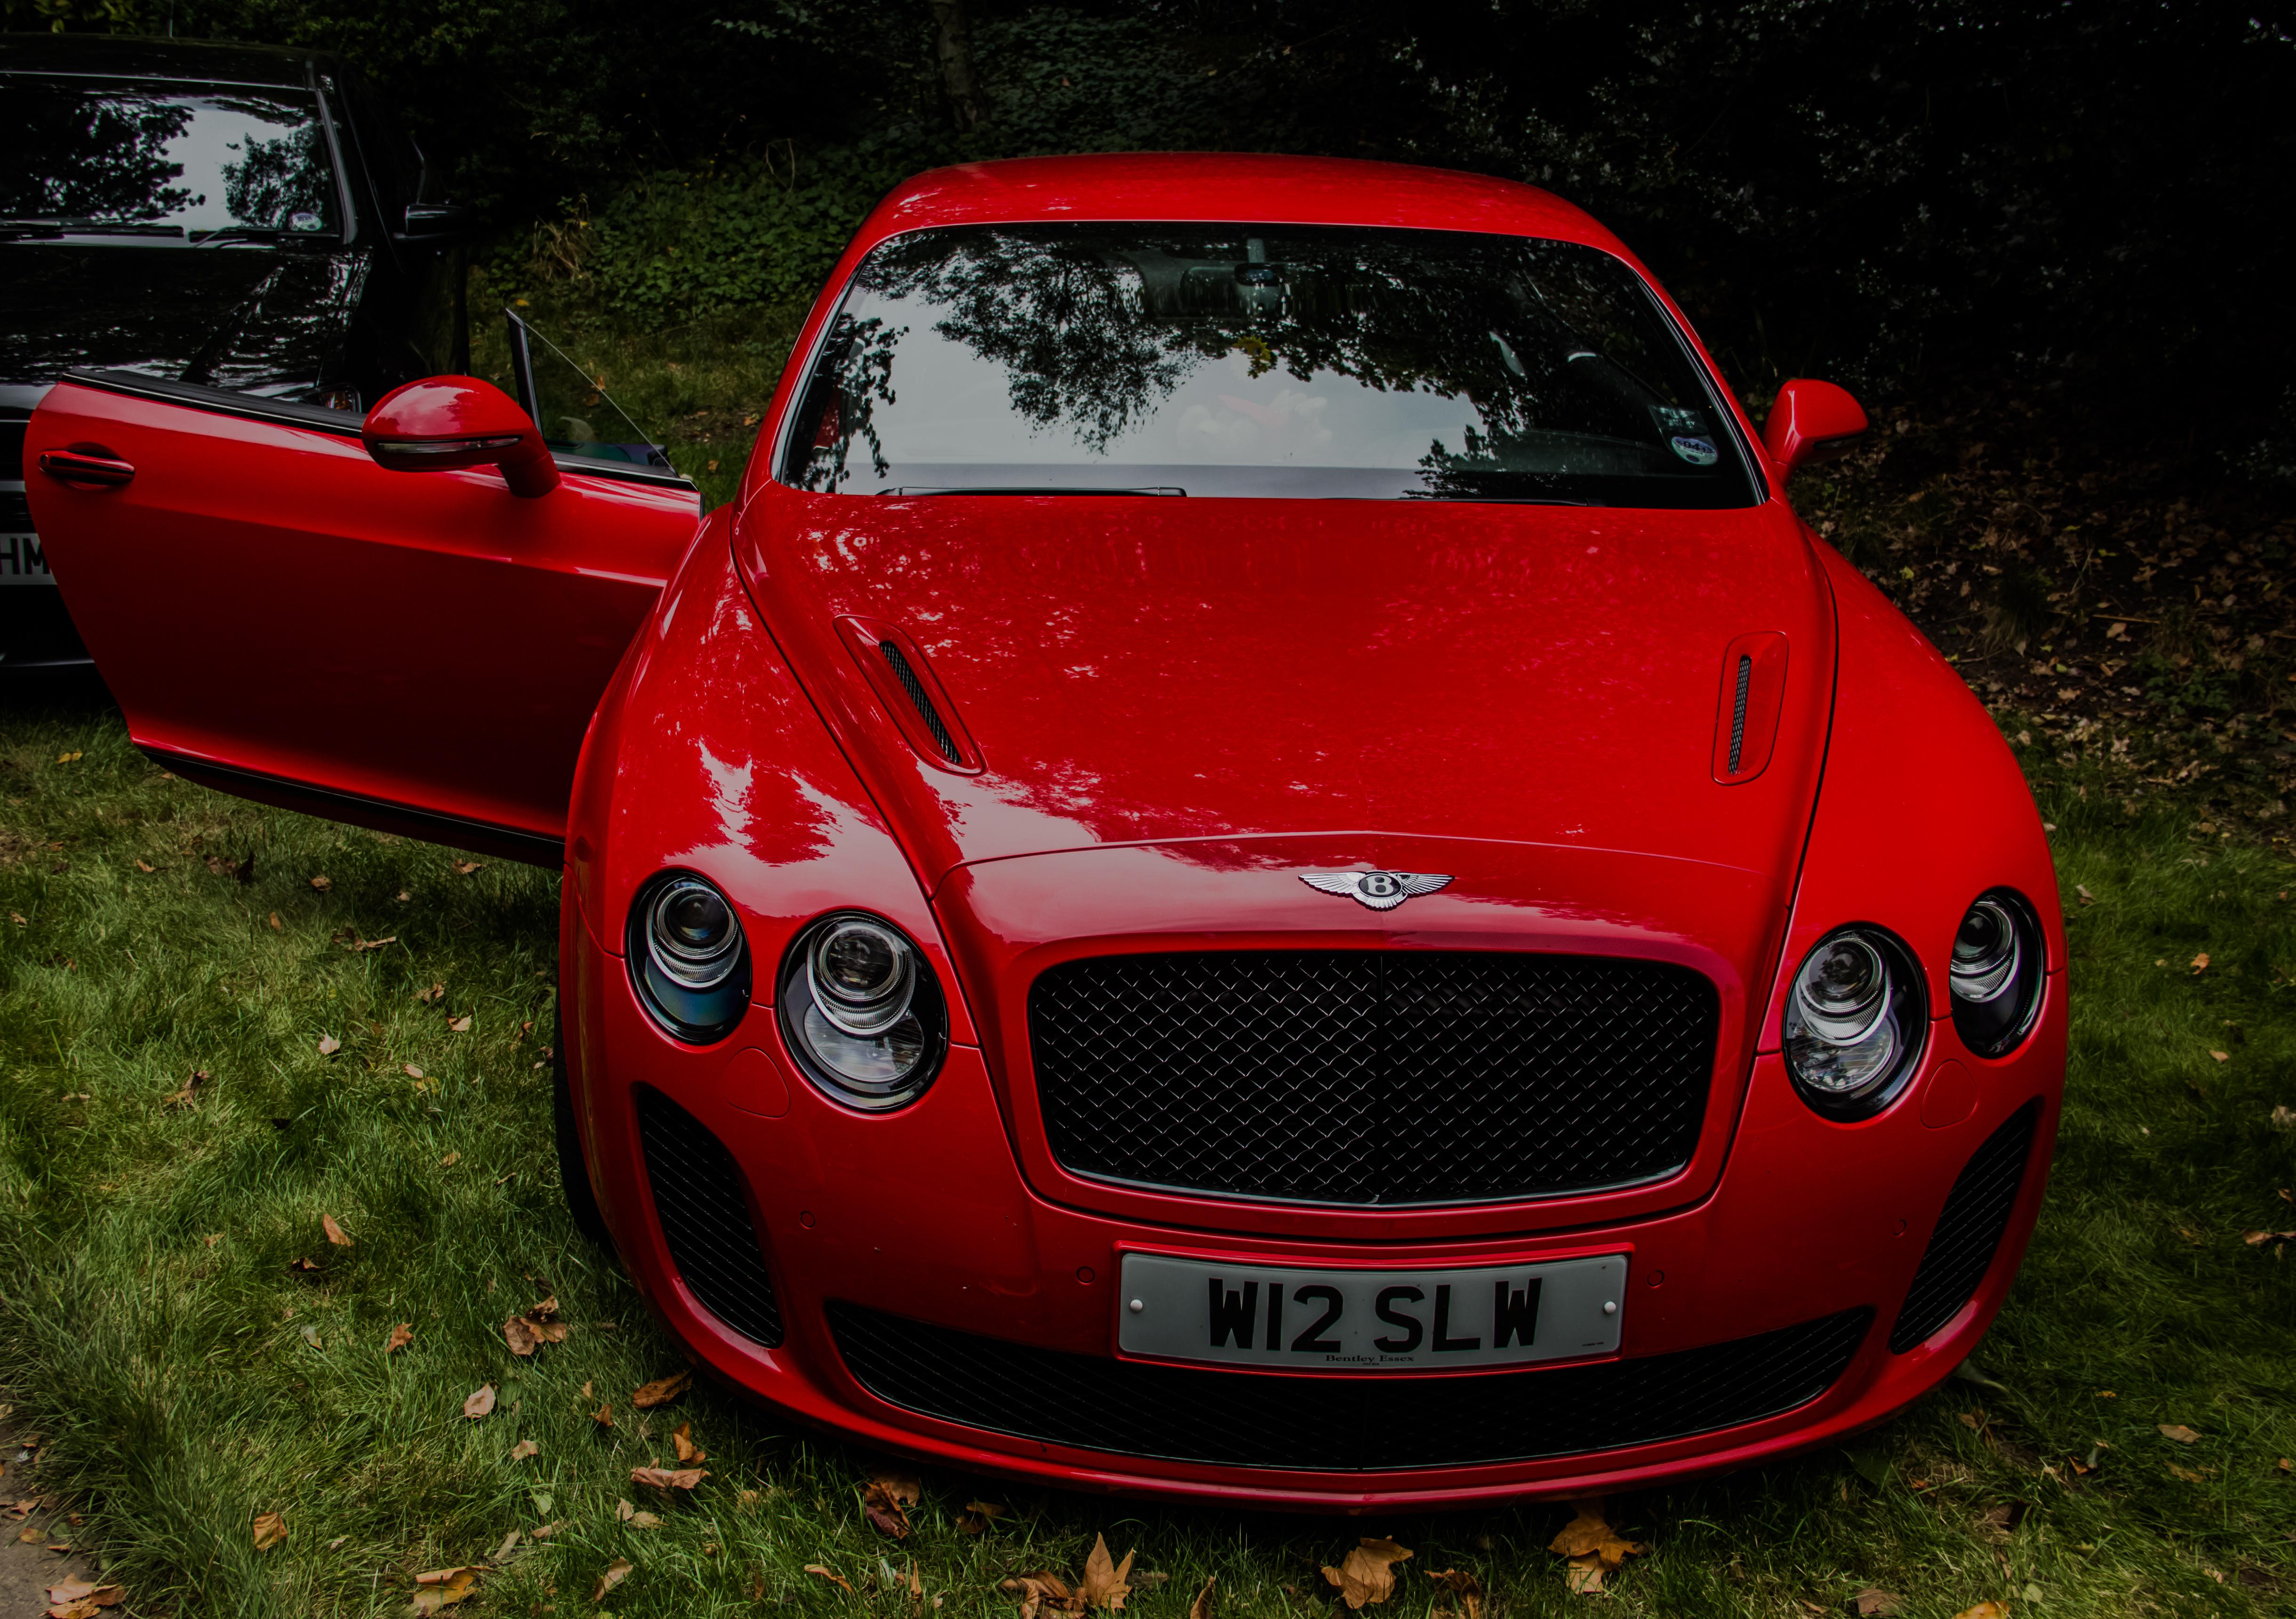 Download wallpaper 4879x3441 bentley continental gt, red, front view